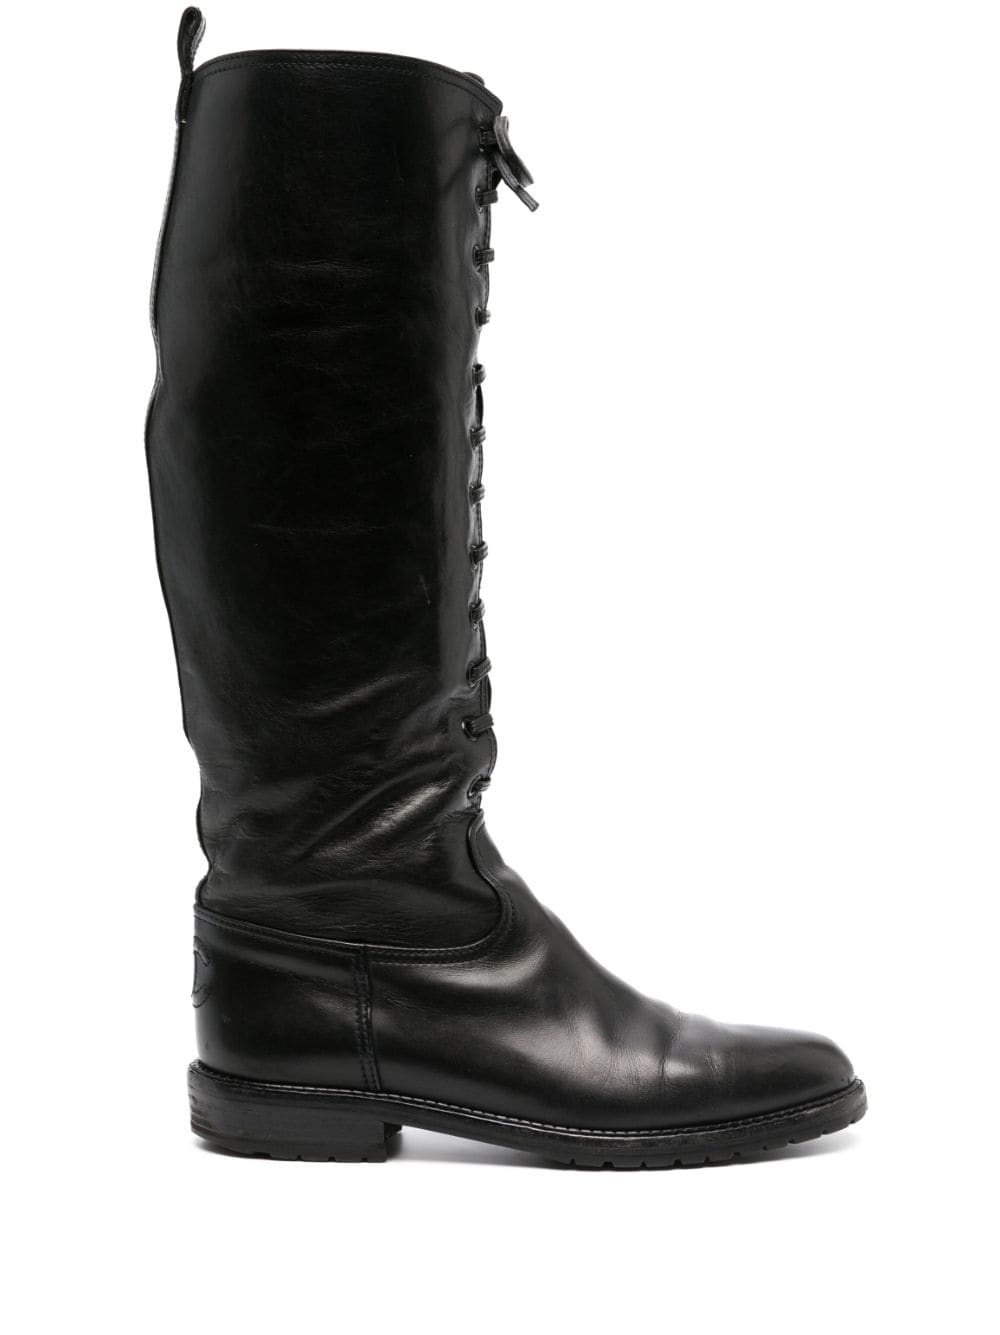 CHANEL Pre-Owned 2000s lace-up knee-high boots - Black